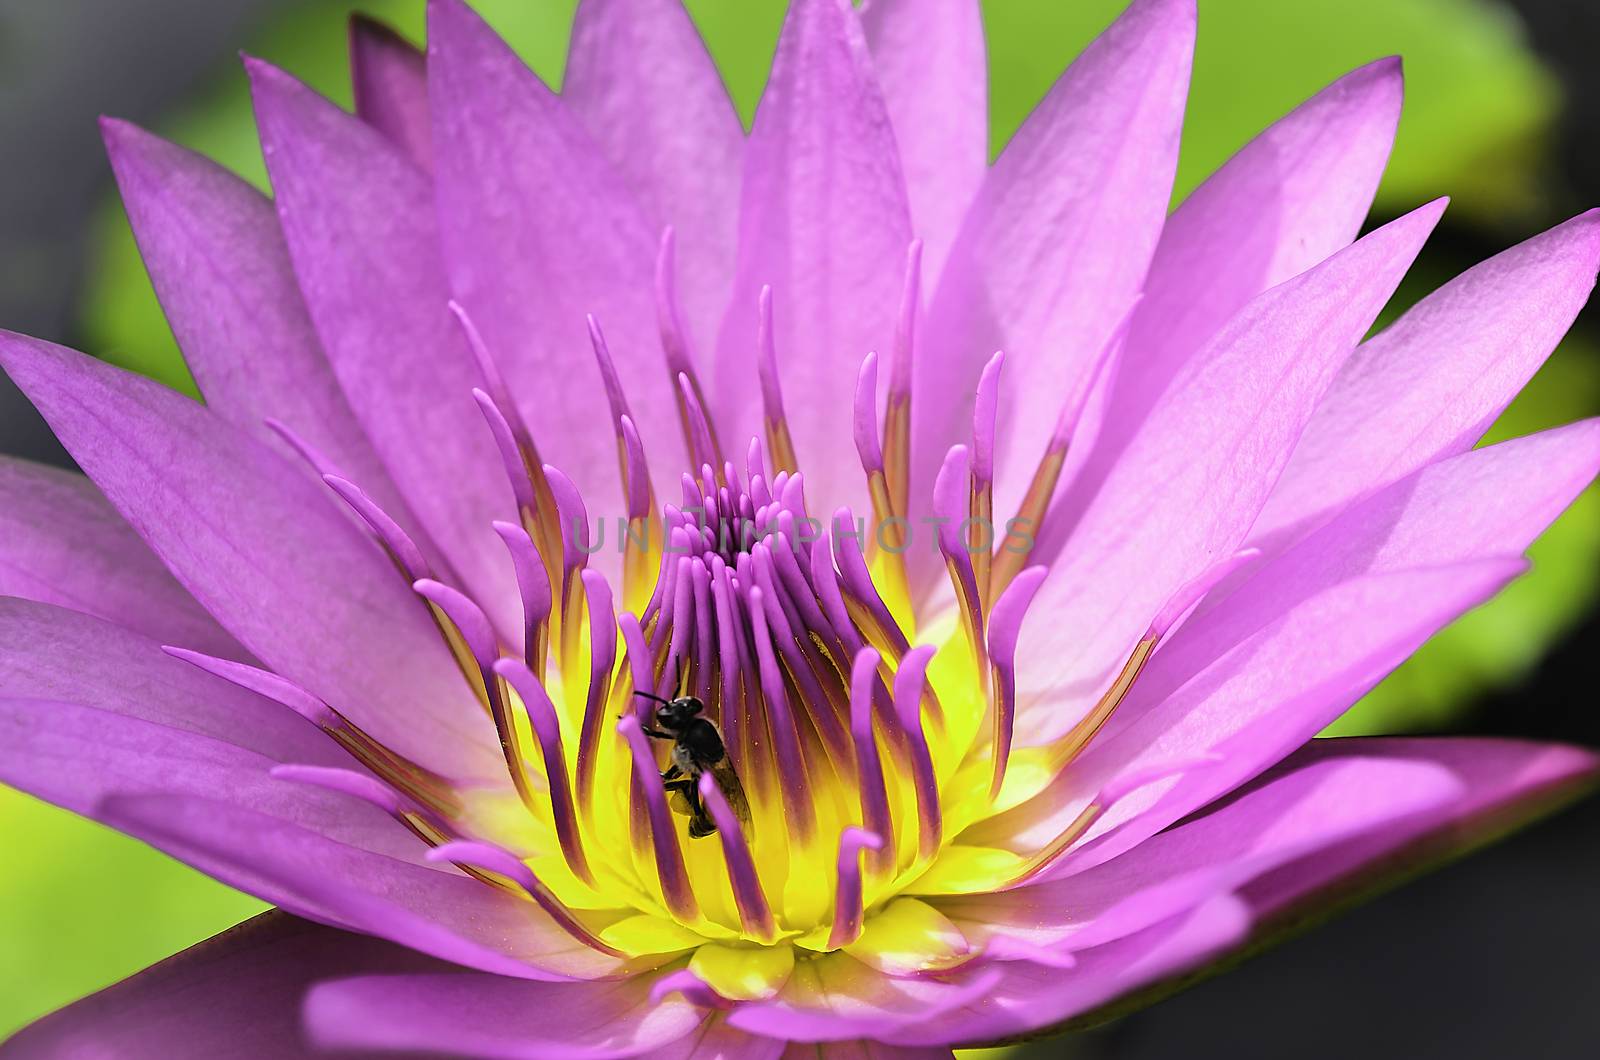 The lotus or water lily in pink-purple with yellow-pink pollen and Bug.